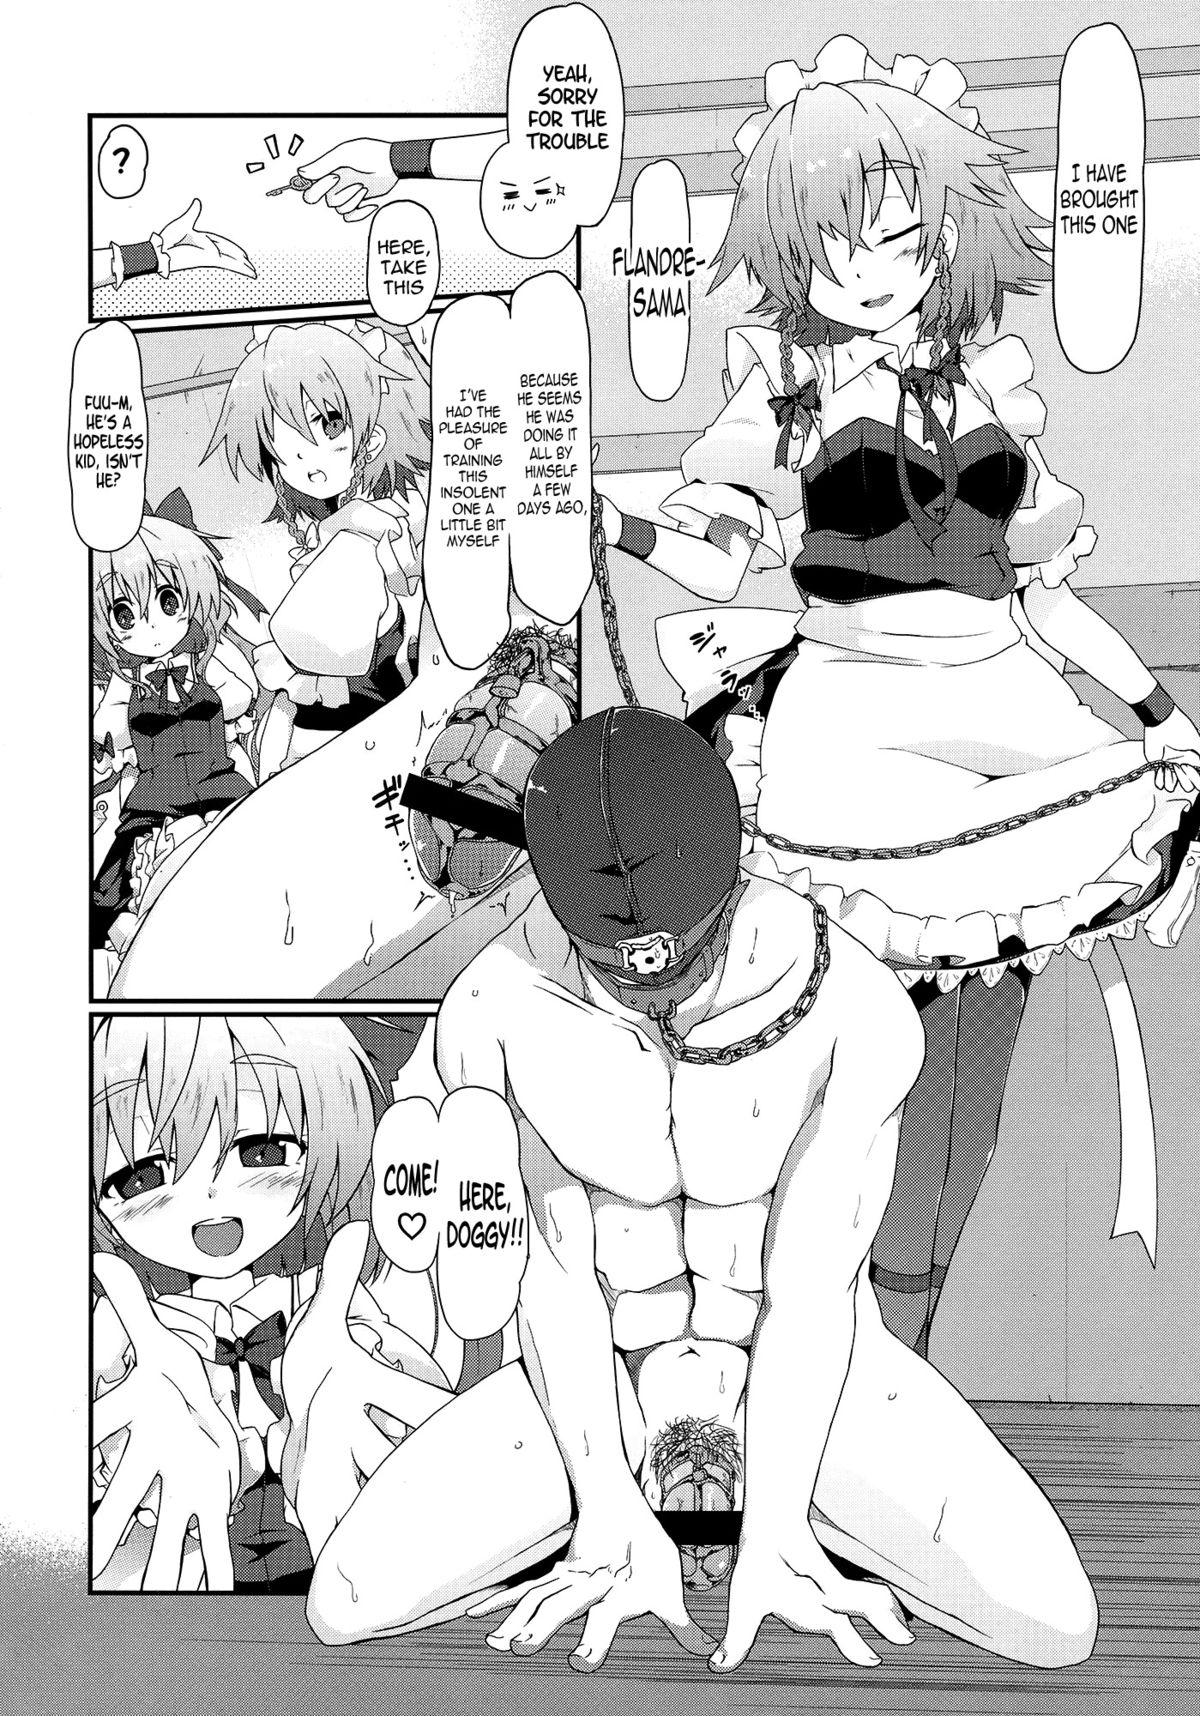 Homemade Flan-chan S: Sadistic Scarlet Style - Touhou project Blowjob Porn - Page 5